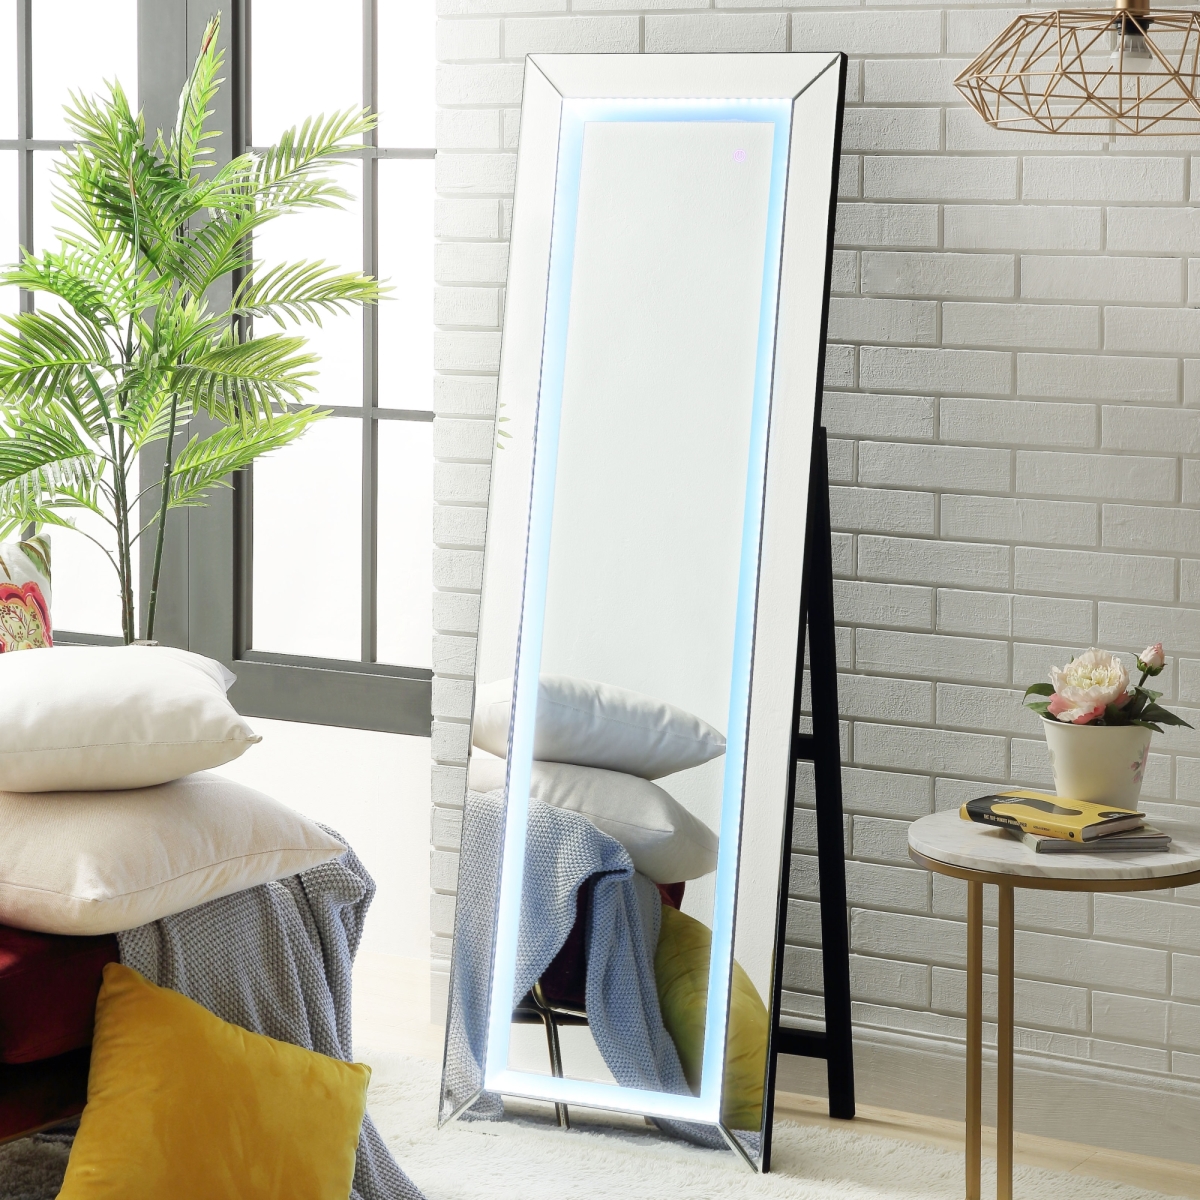 Jf148-09nc Bedisa Led Full Length Floor Standing Mirror With Plug & Touch Sensor Switch - 63 X 1 X 20 In.